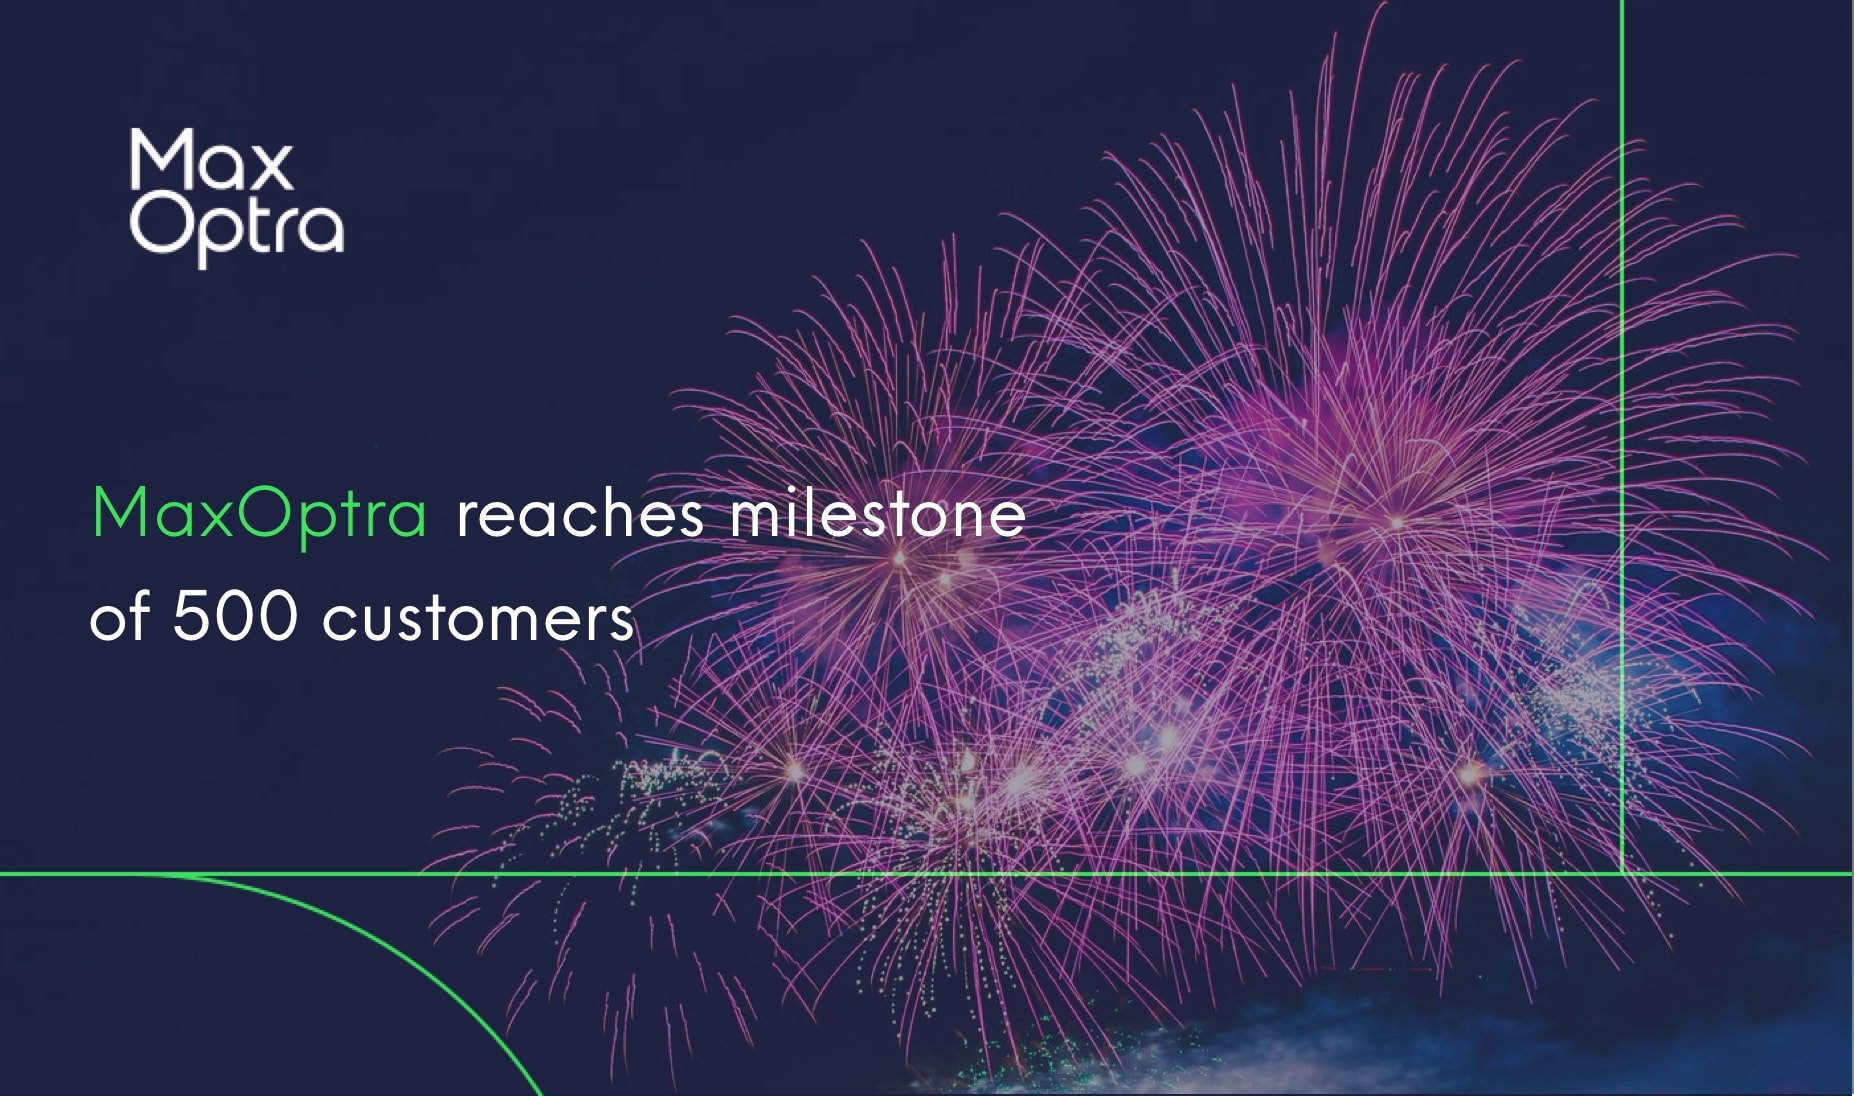 MaxOptra reaches milestone of 500 customers and 3 million routes planned per month